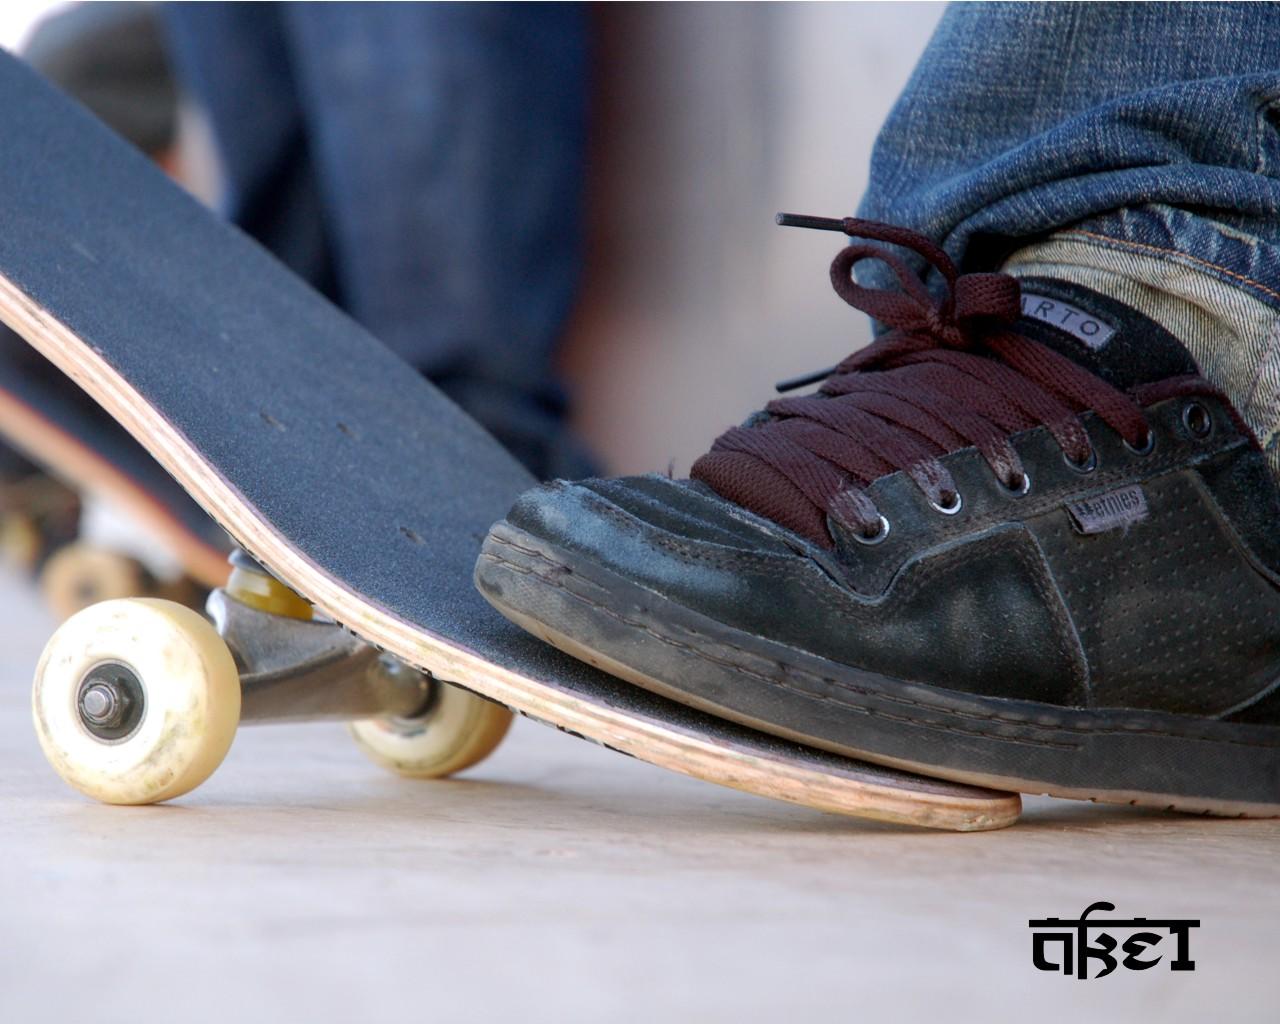 Skateboarding Wallpaper and Background Imagex1024